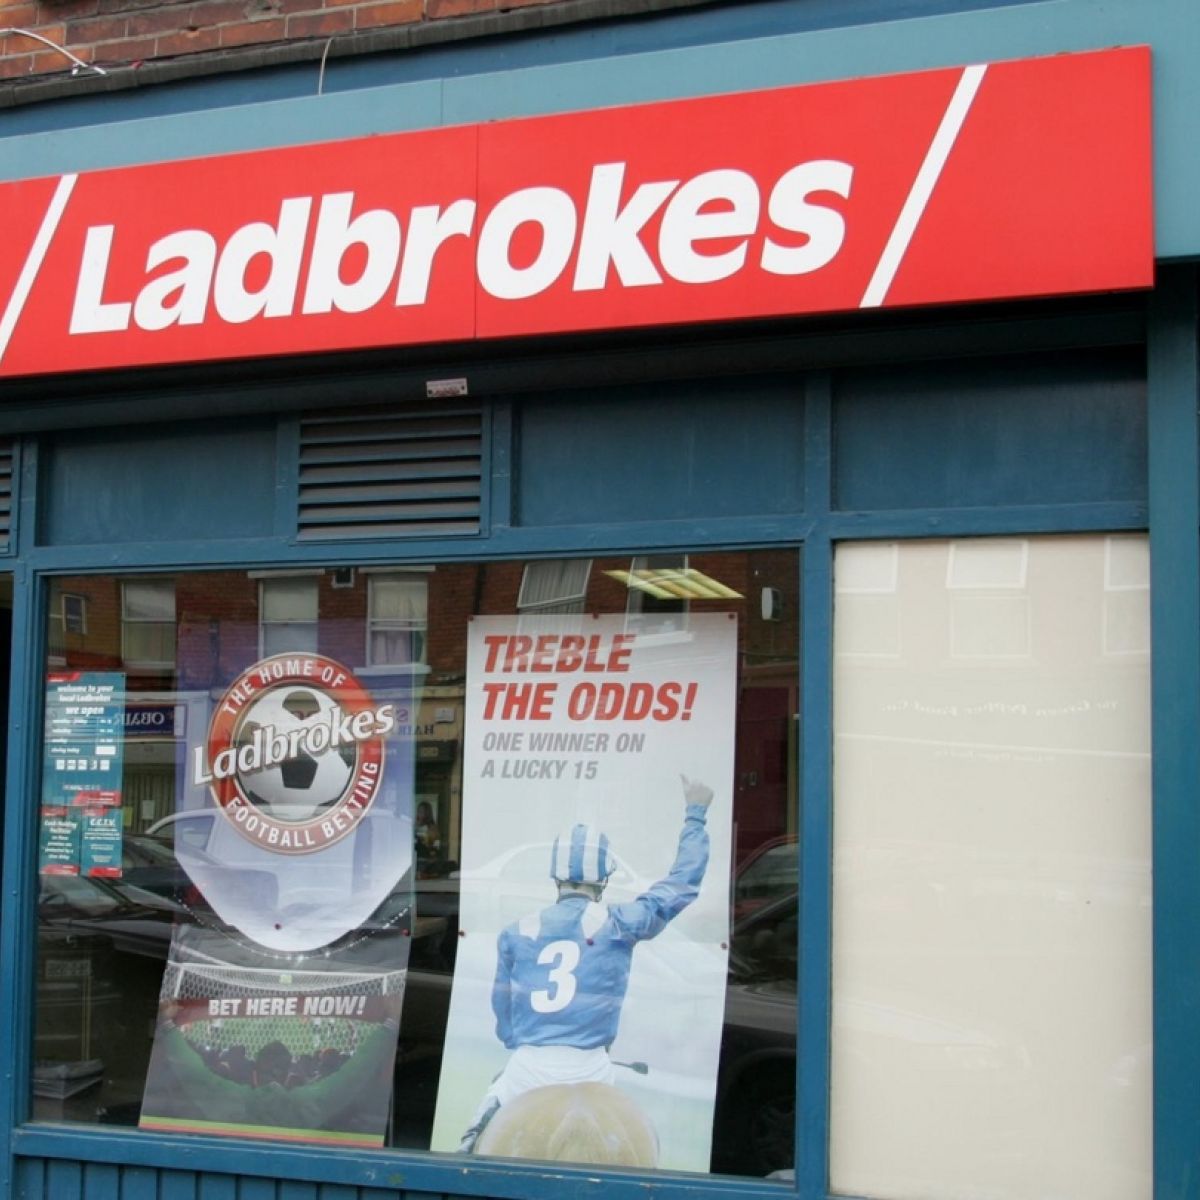 How To Place A Bet In Ladbrokes Shop